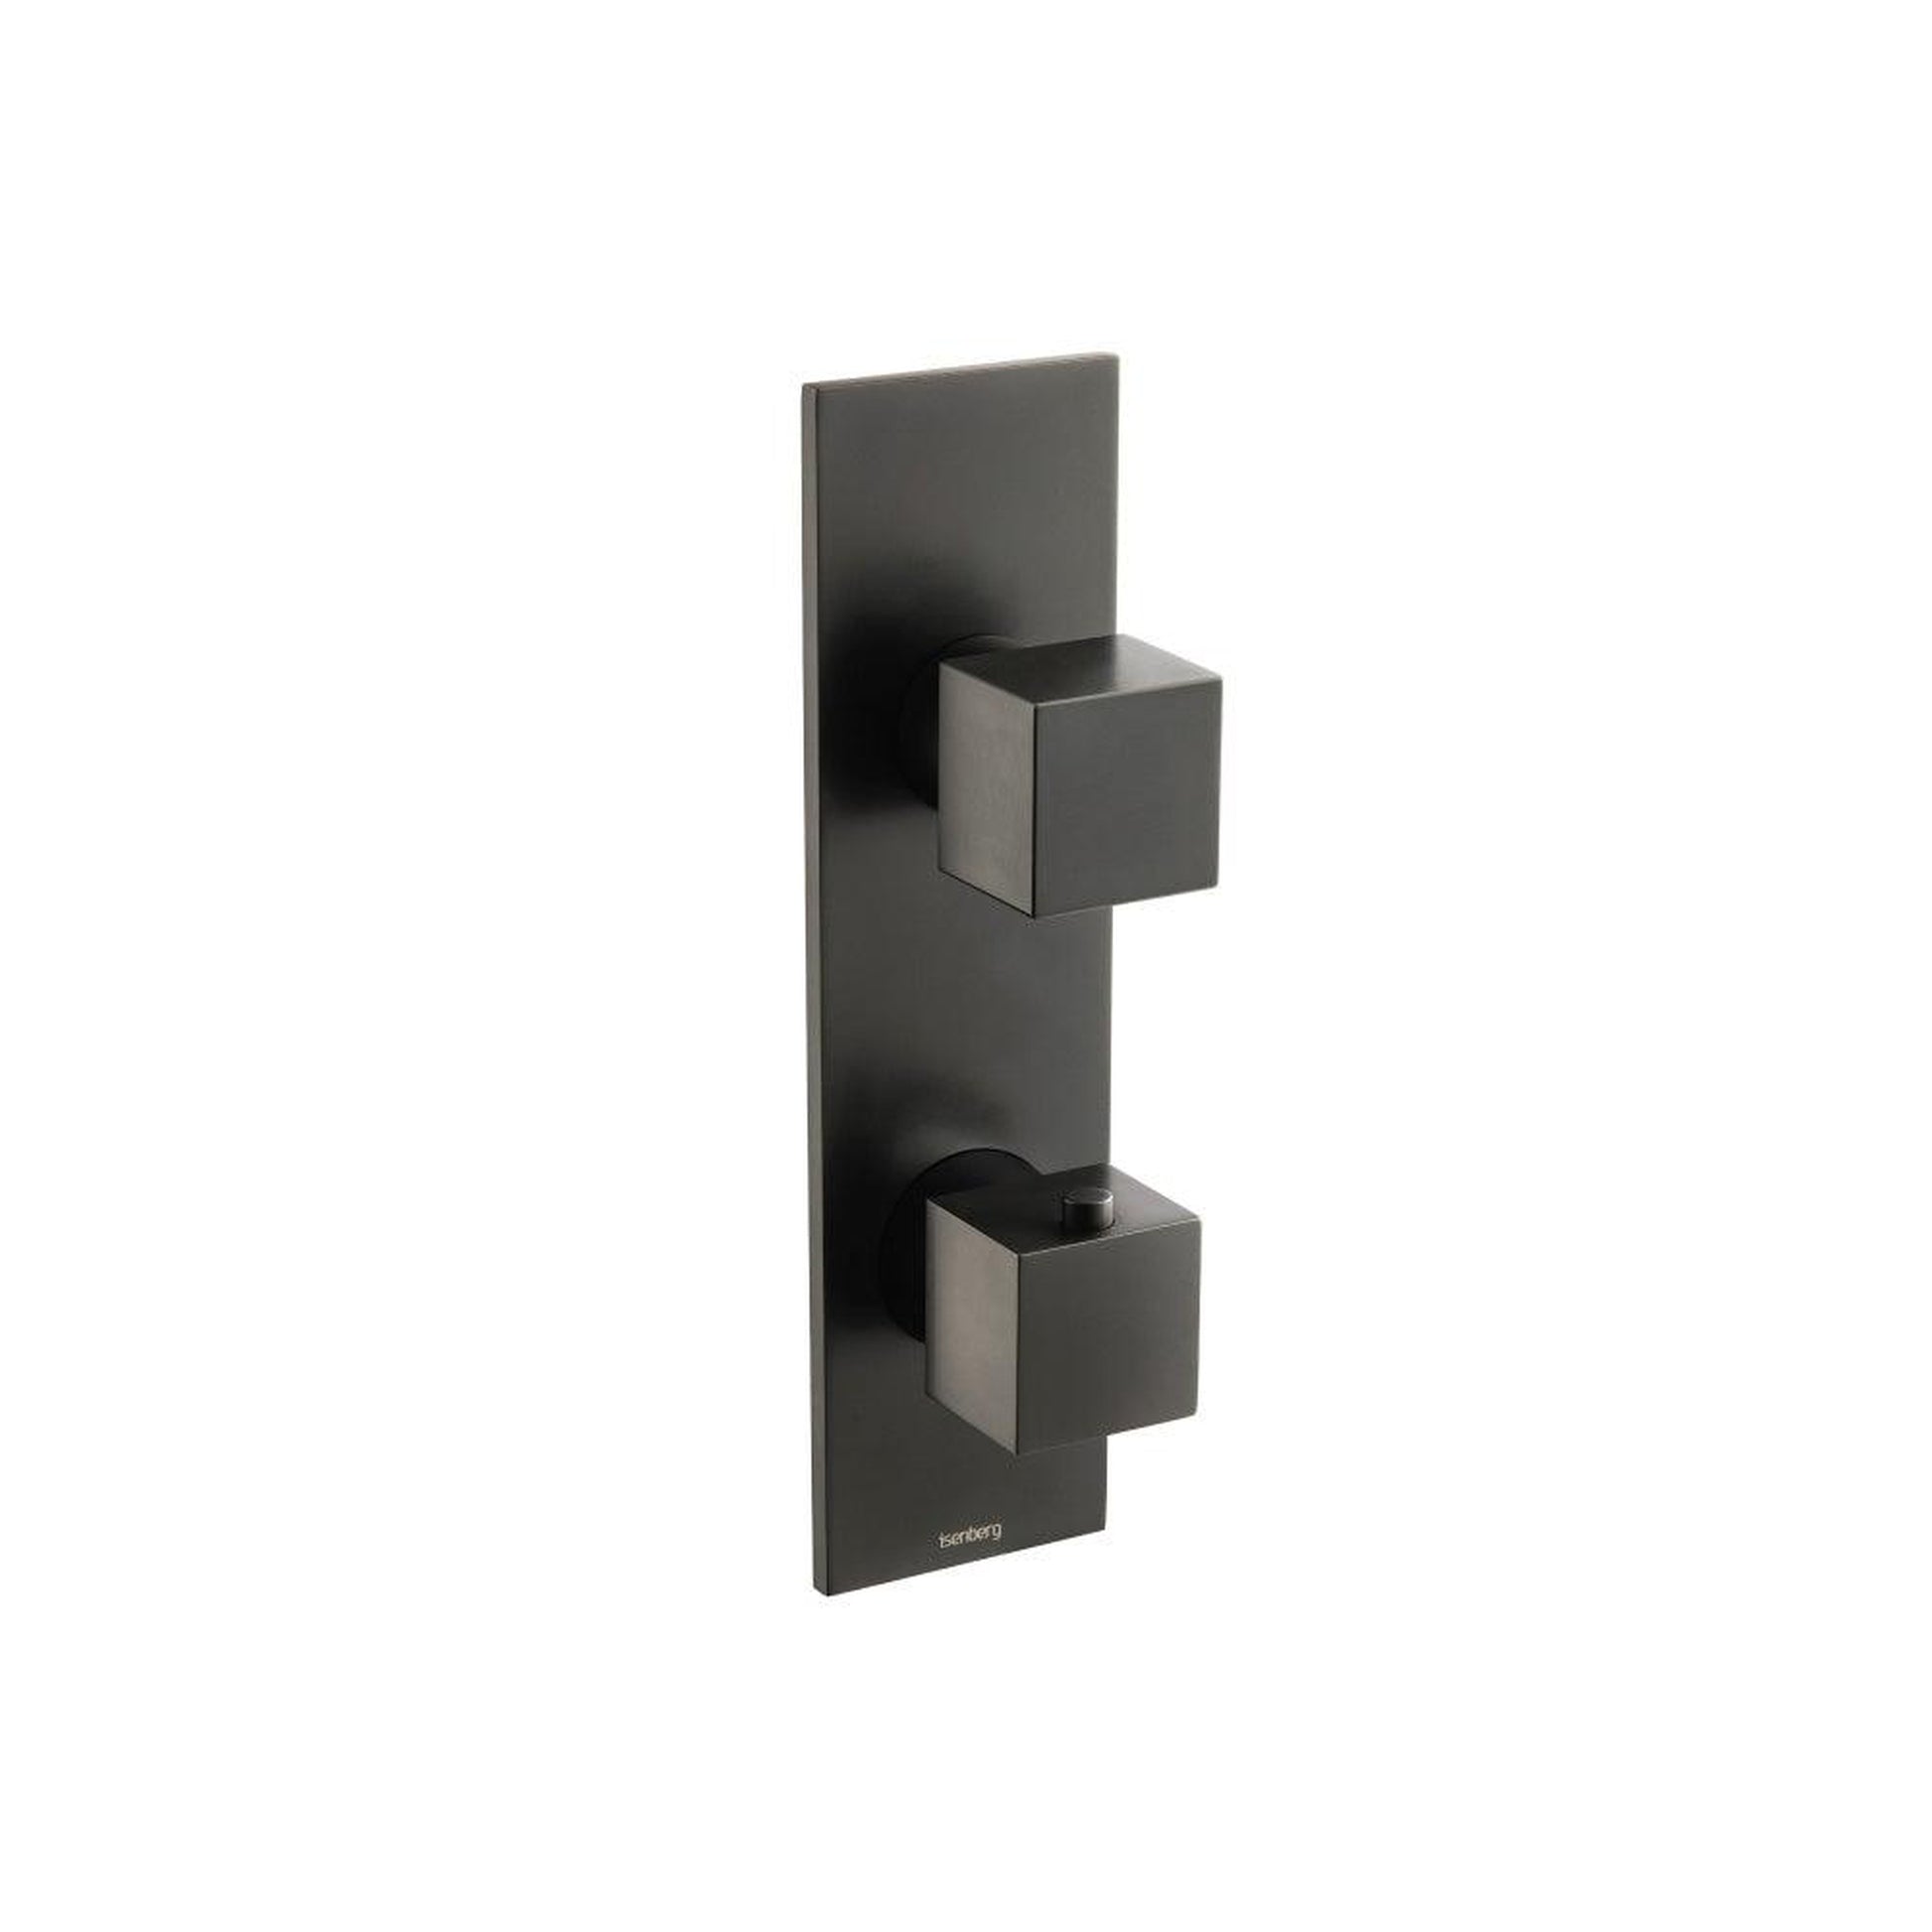 Isenberg Serie 160 3/4" Single Output Horizontal Thermostatic Shower Valve and Trim in Matte Black (160.2720MB)